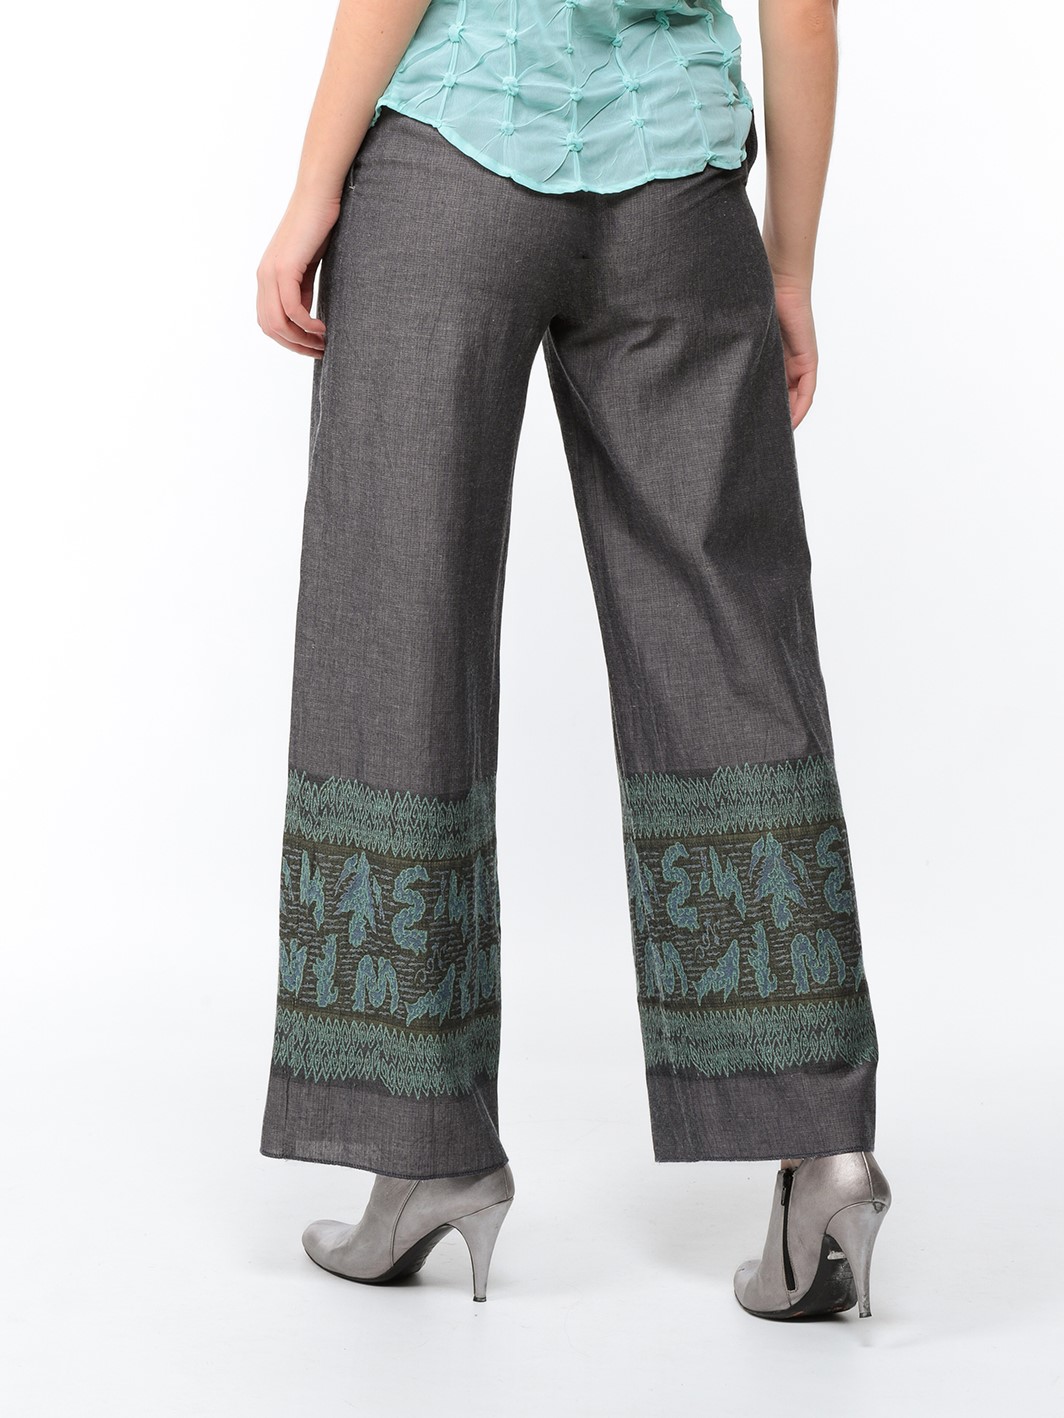 Wide trousers in steel grey canvas with turquoise and khaki embroidered stockings